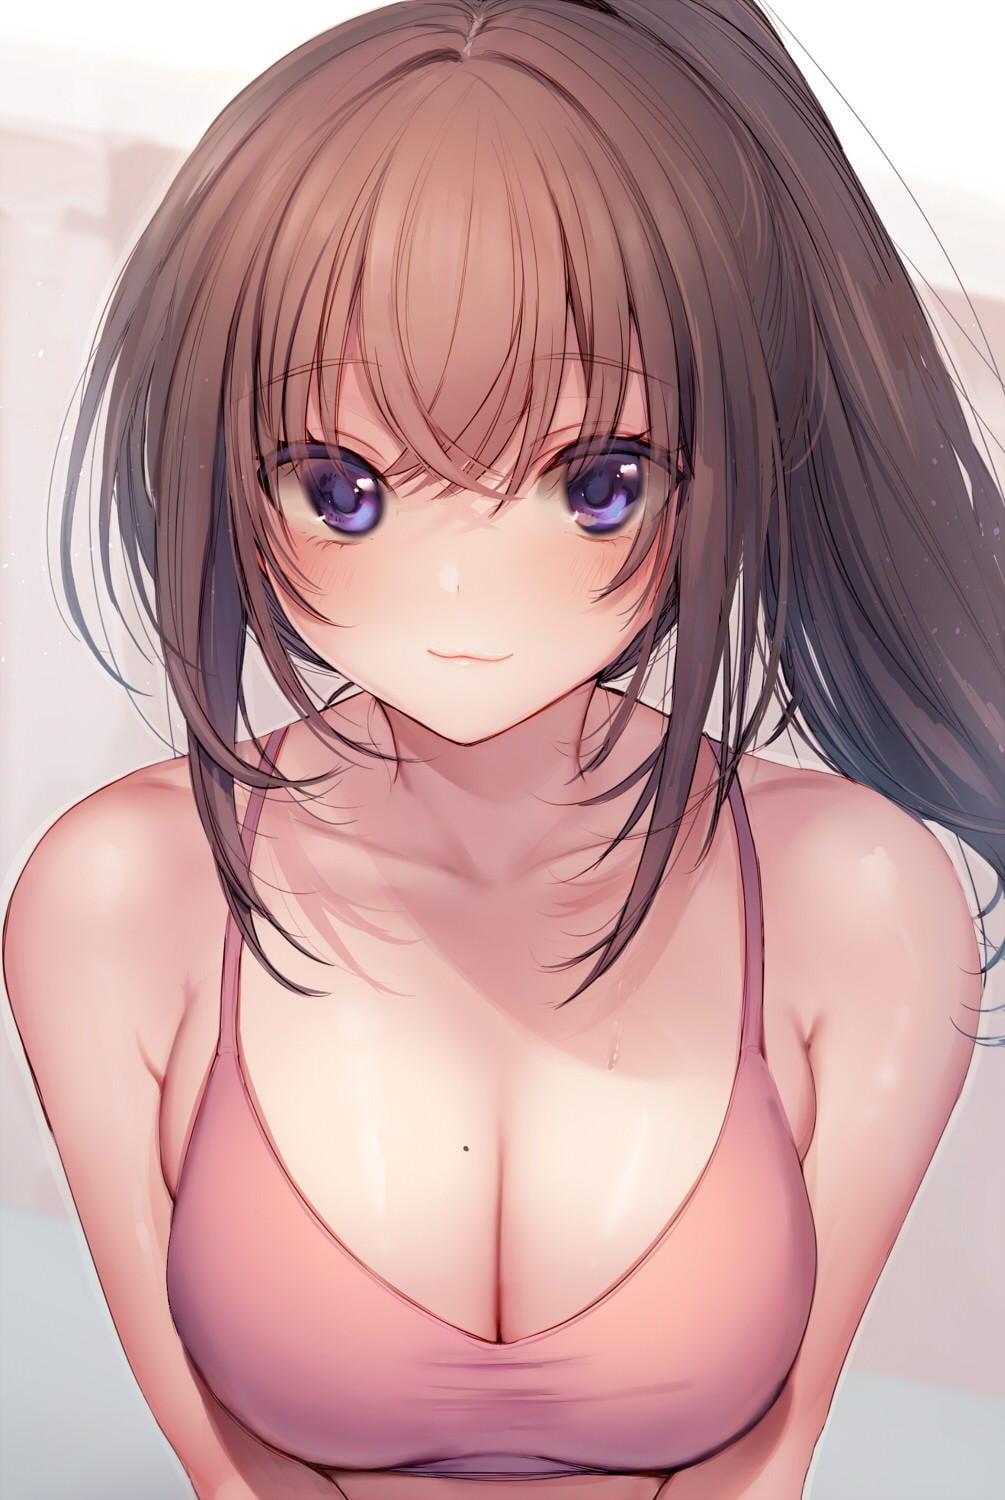 anime girls, original characters, cleavage, boobs, smiling